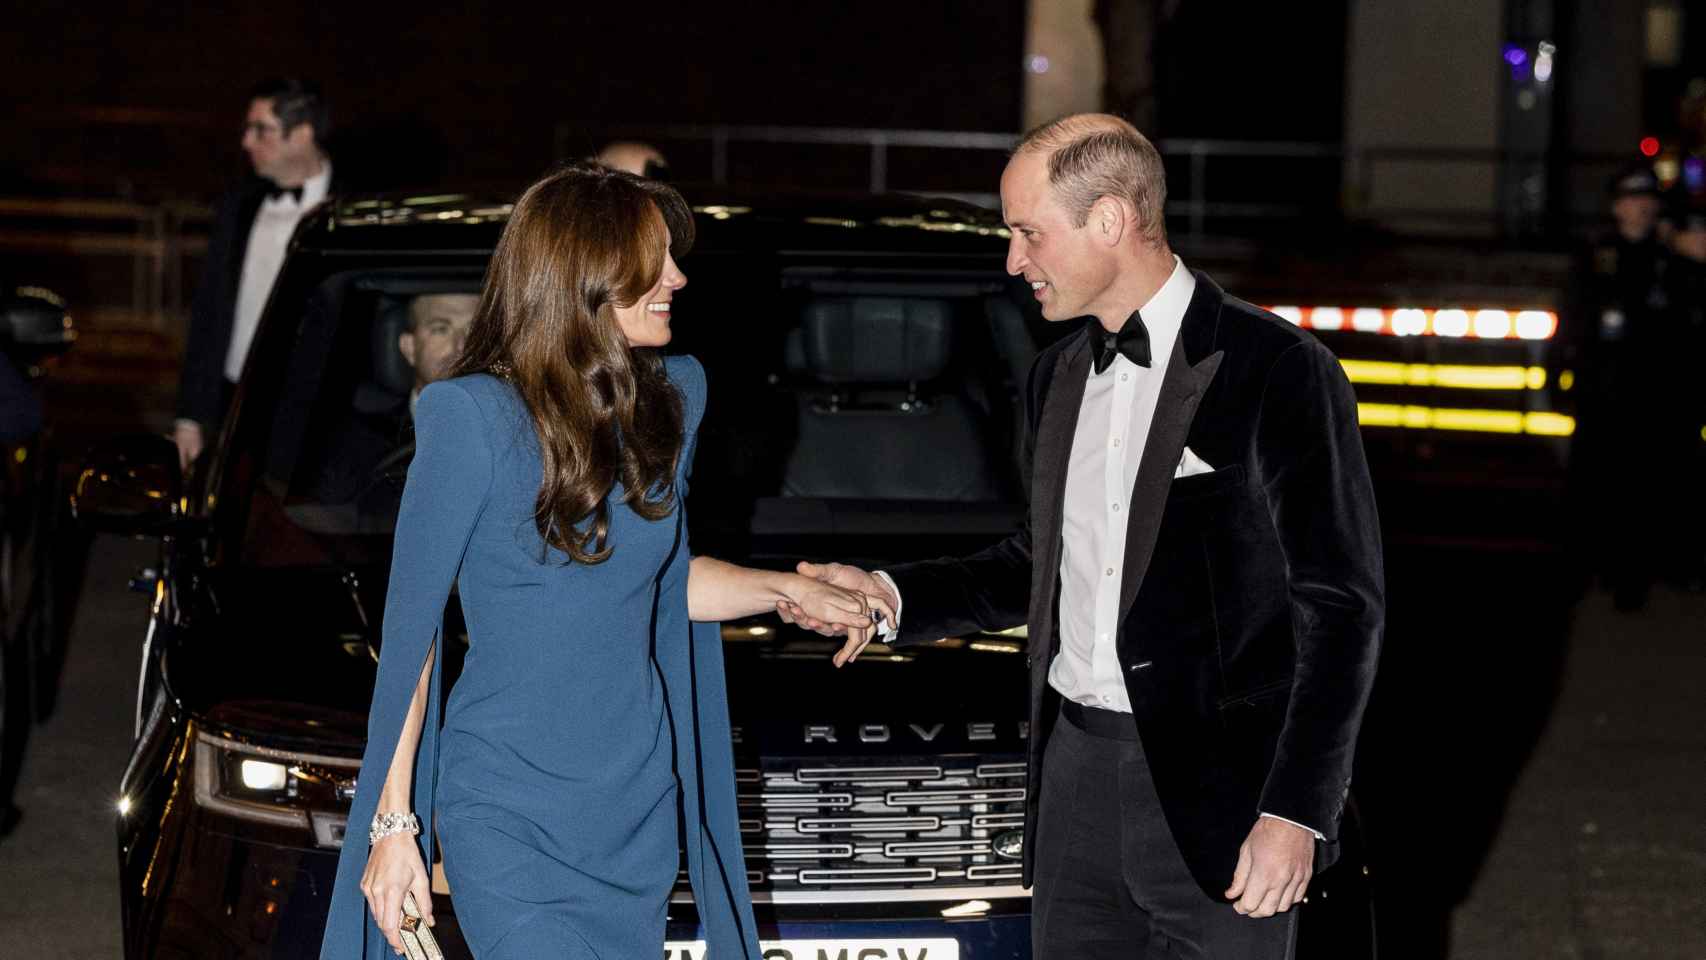 Guillermo y Kate Middleton.